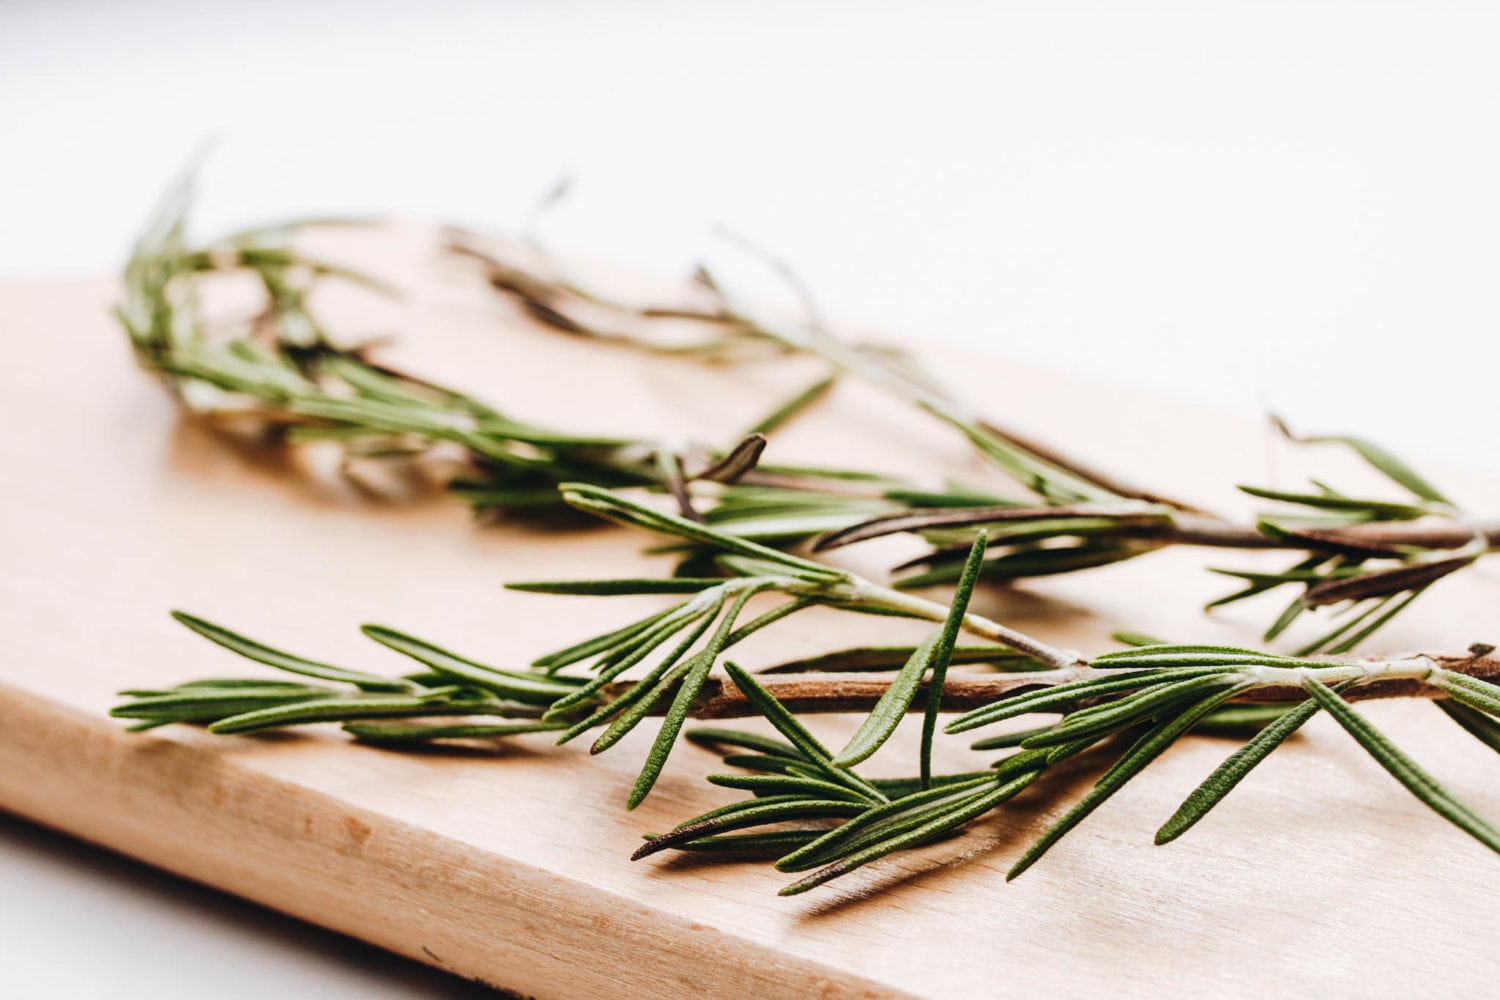 Fresh rosemary on a wooden board. Close up